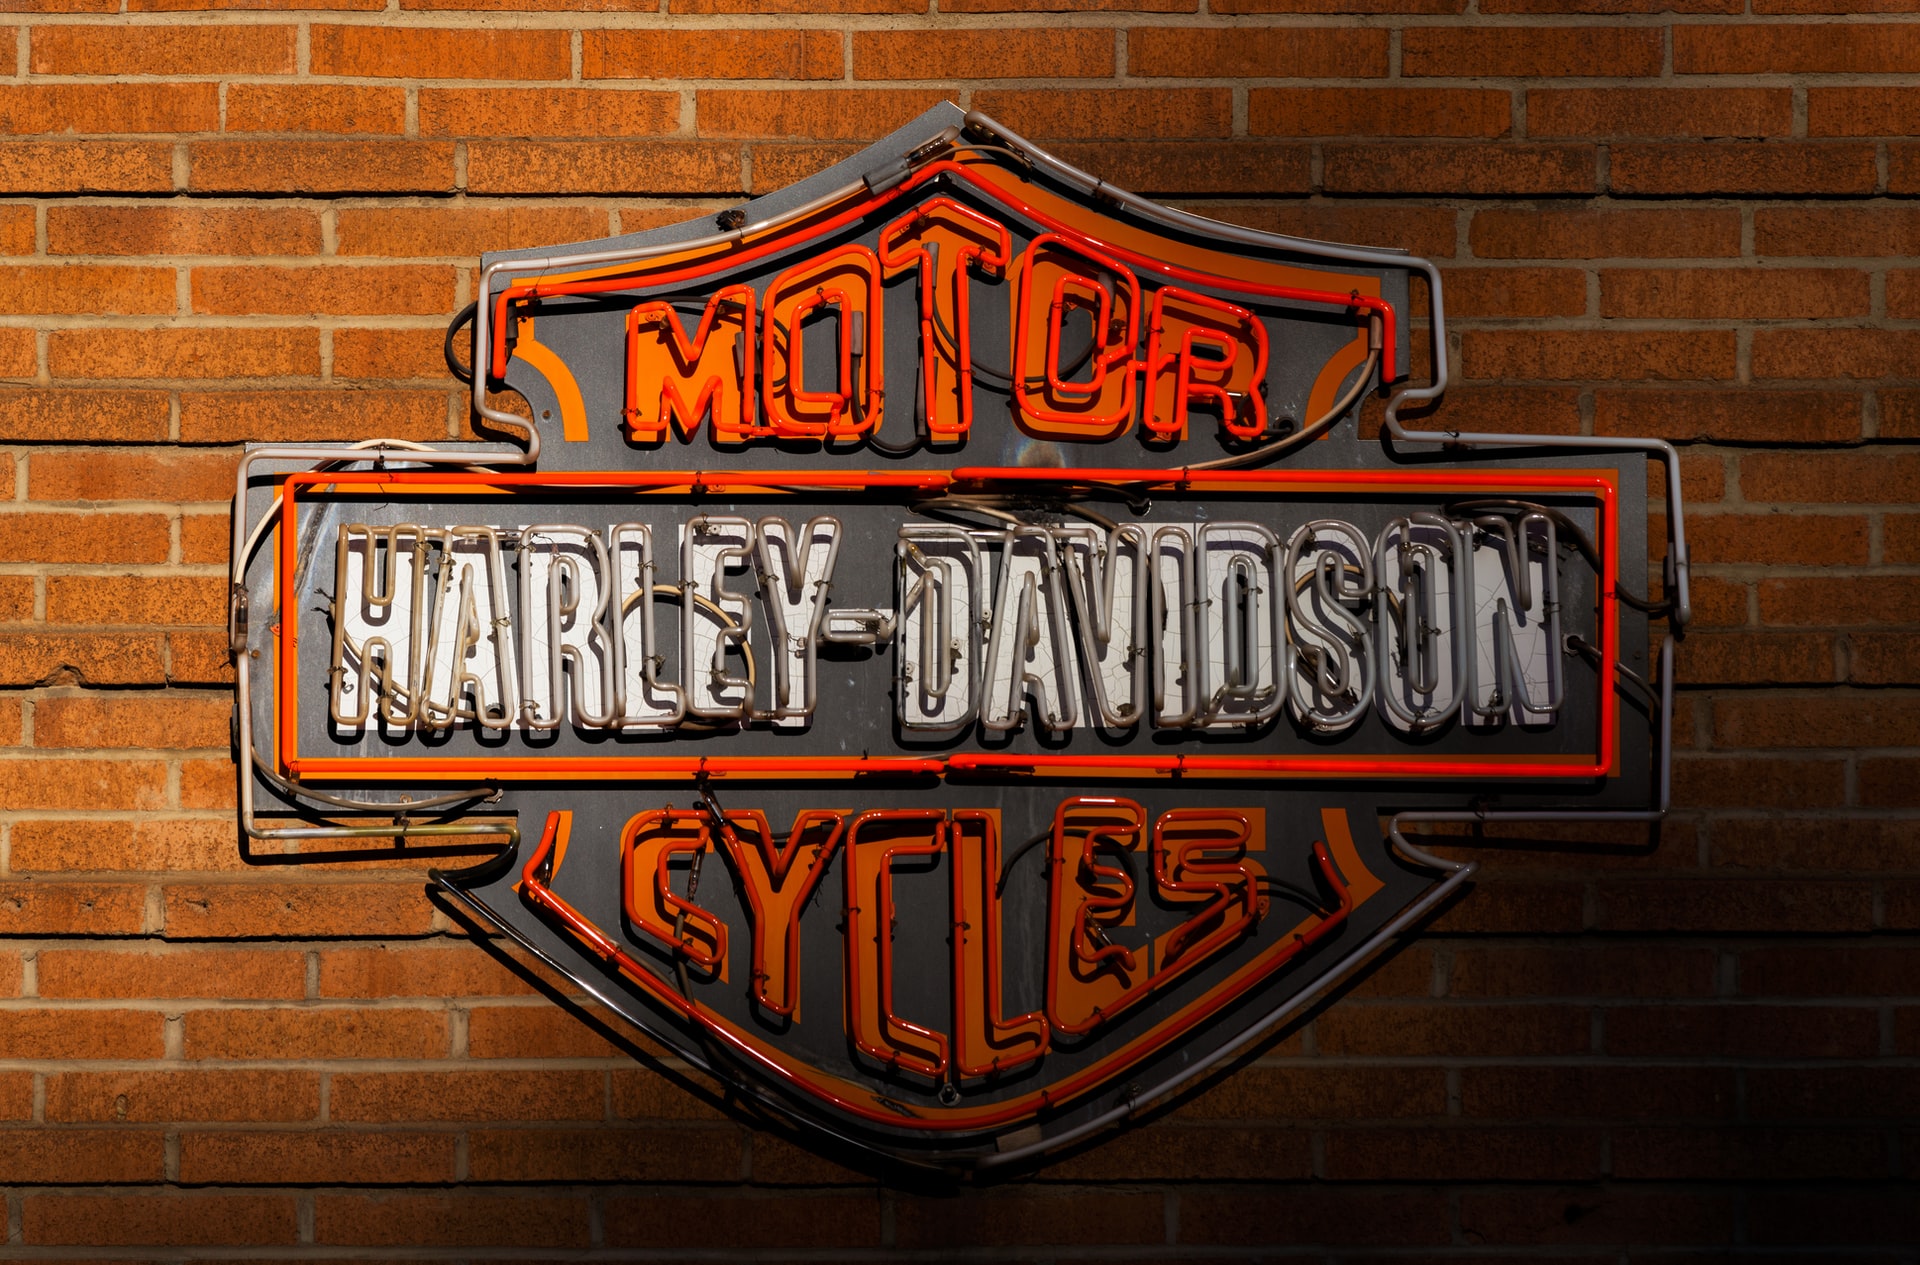 harley-davidson motorcycles neon sign in front of a brick wall